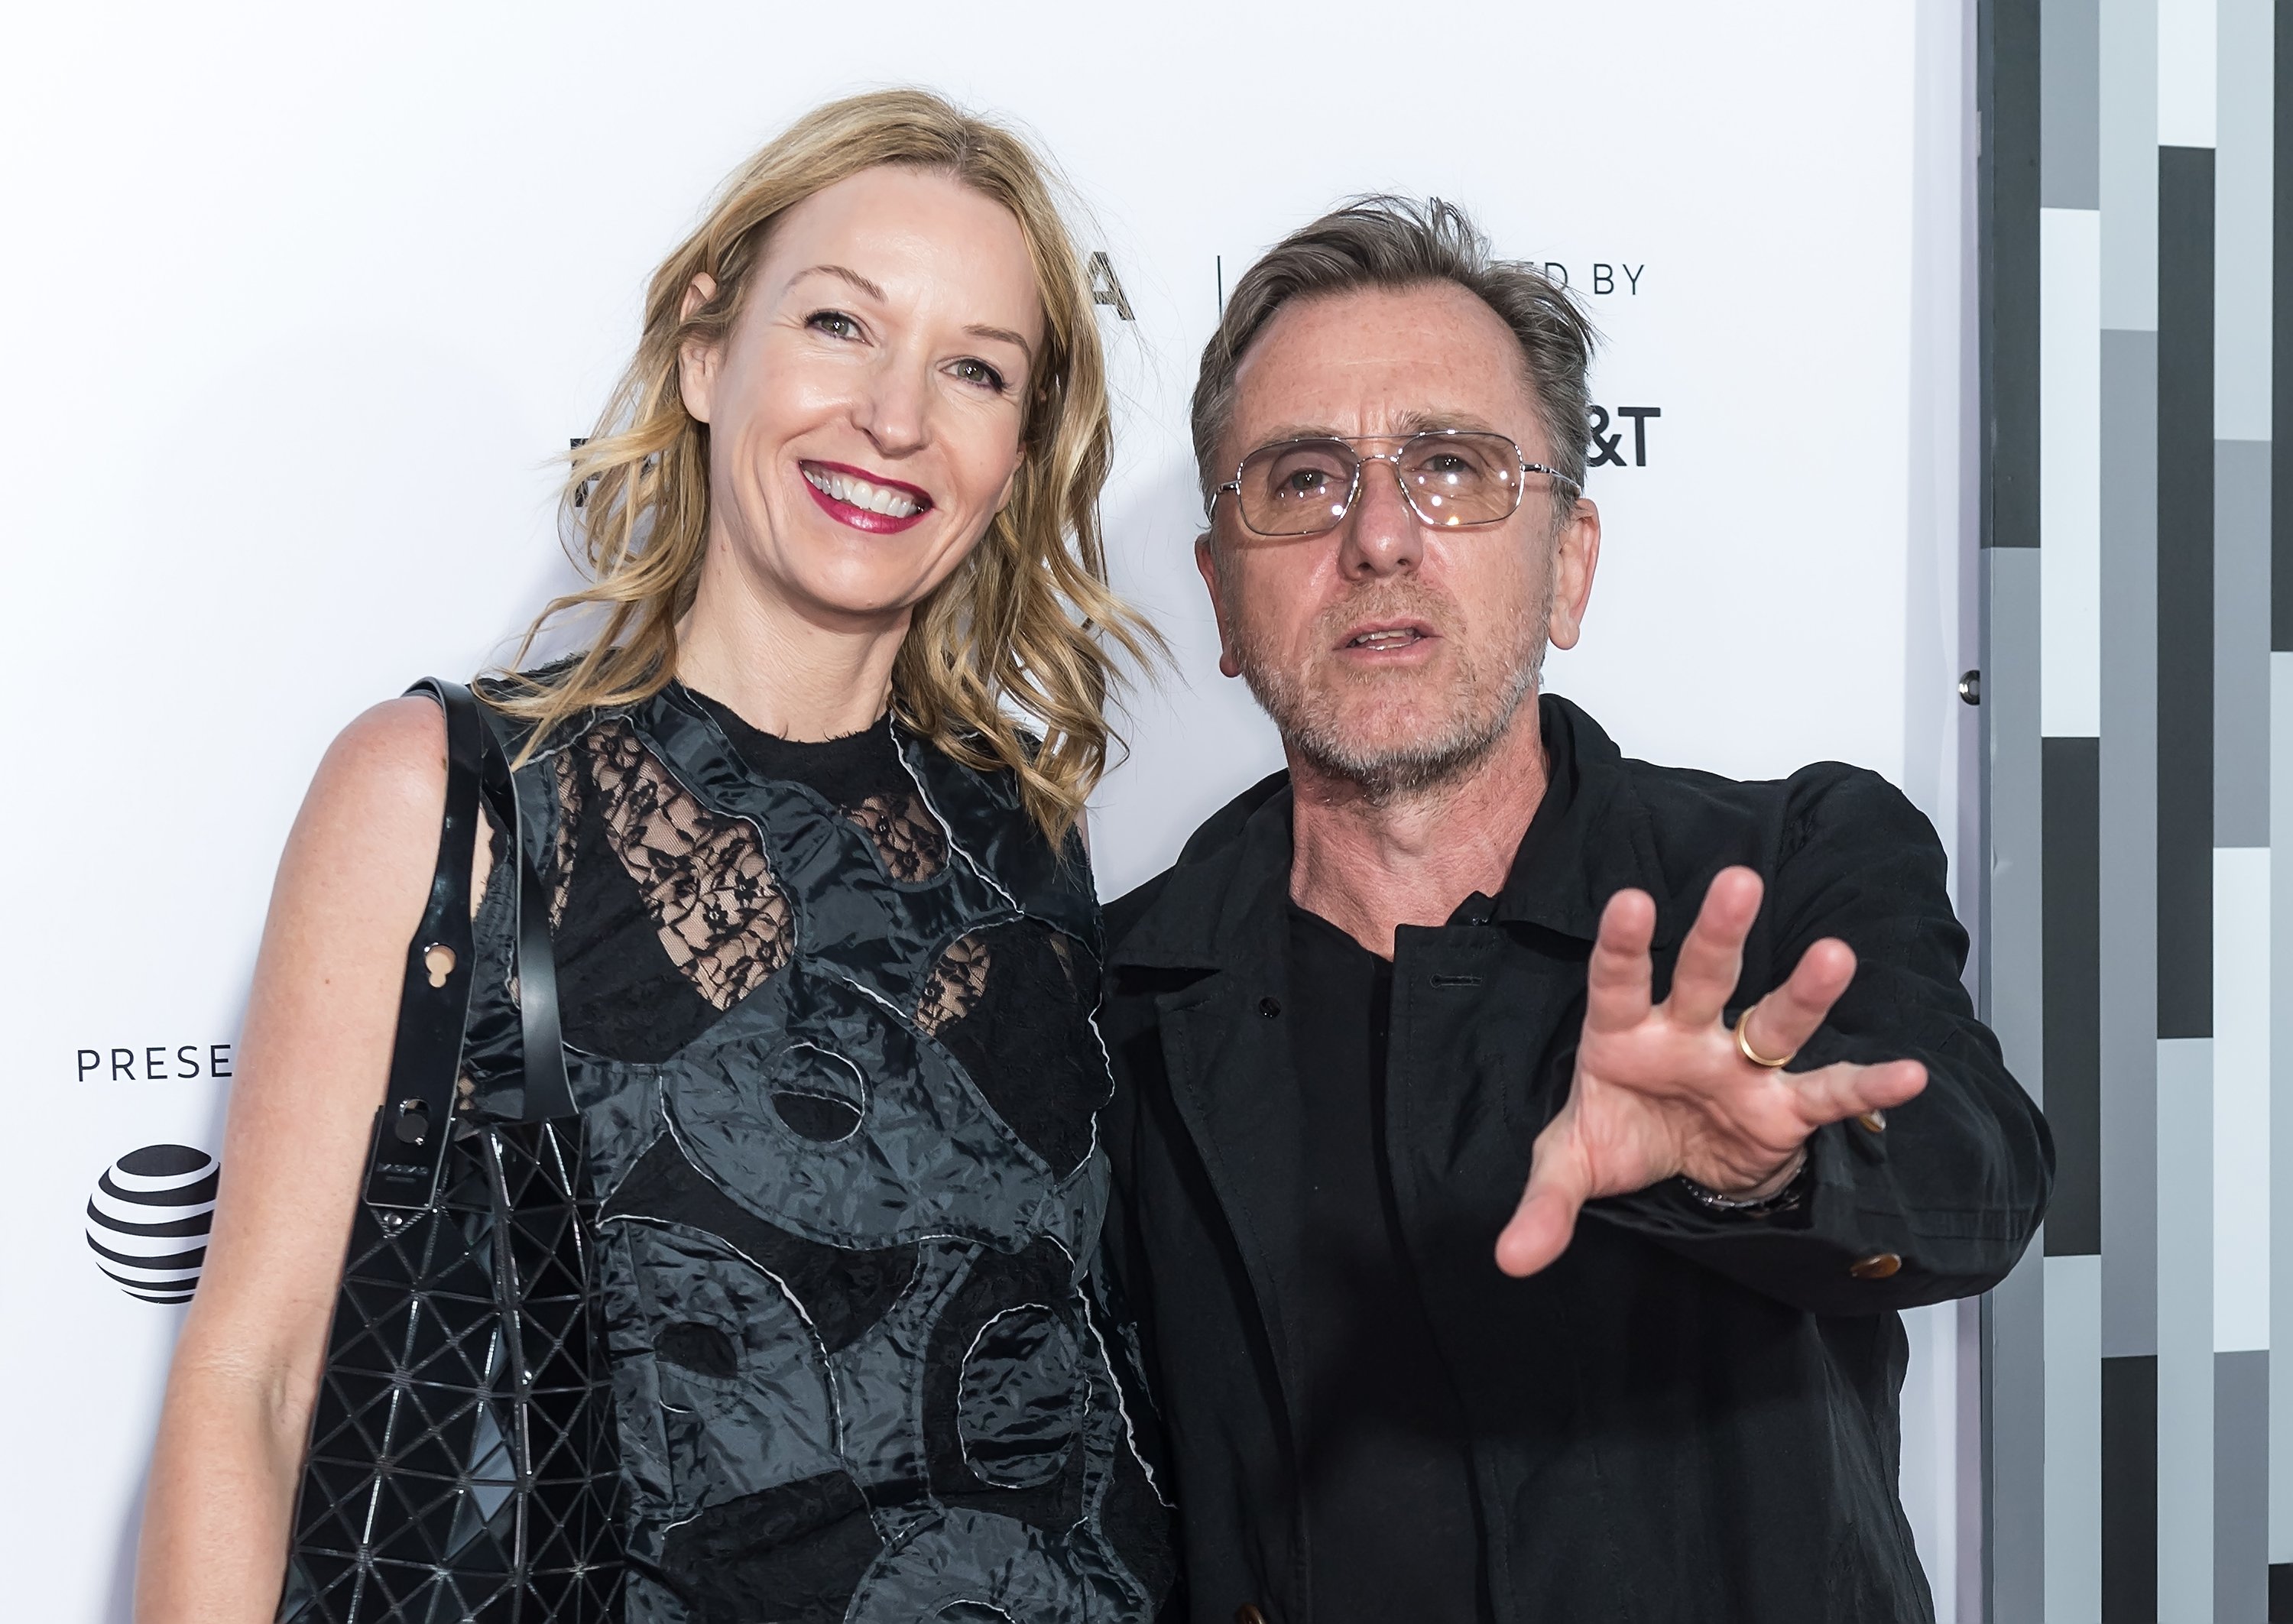 Tim Roth (R) and his wife Nikki Butler attend "Reservoir Dogs" 25th Anniversary Screening during 2017 Tribeca Film Festival at The Beacon Theatre on April 28, 2017 in New York City. | Source: Getty Images